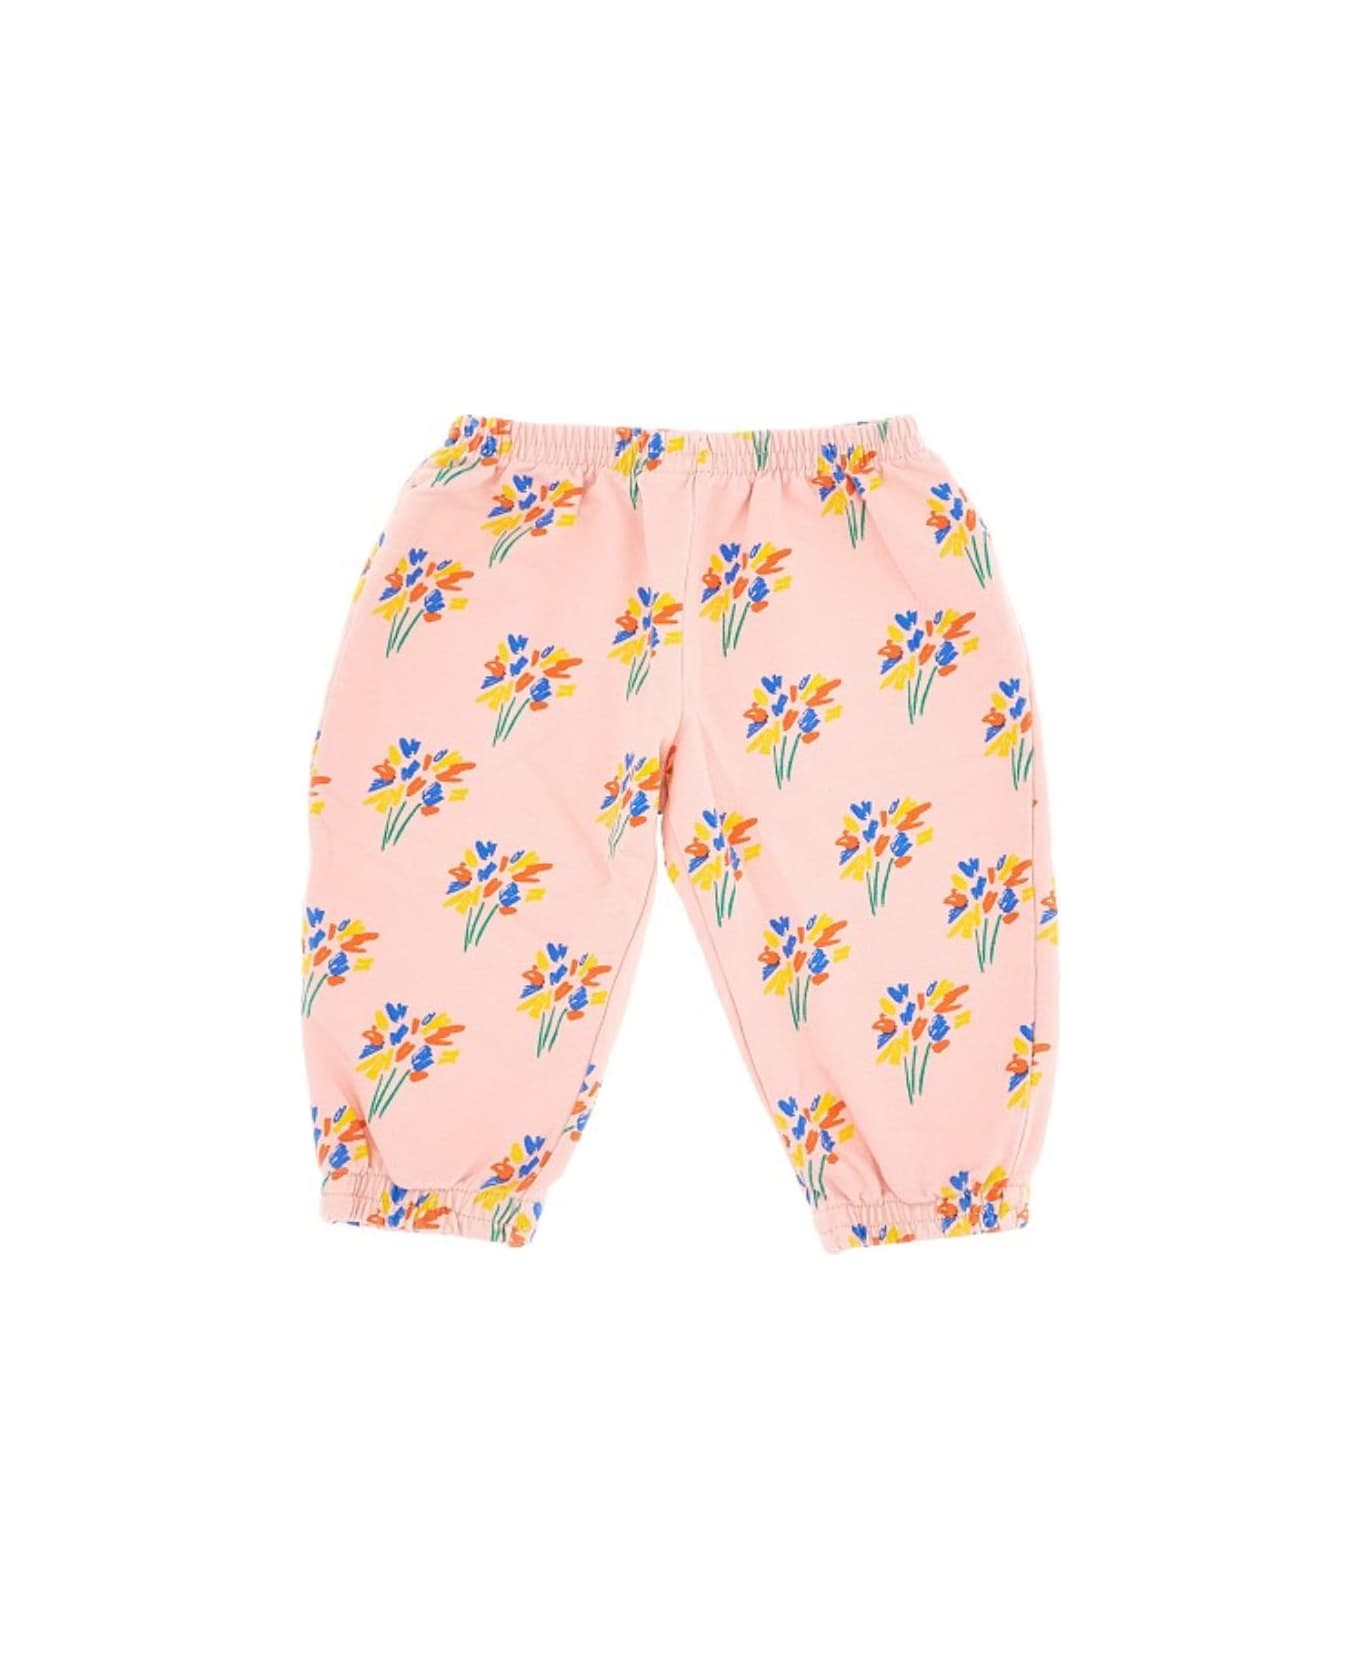 Bobo Choses Baby Fireworks All Over Jogging Pants - Pink ボトムス